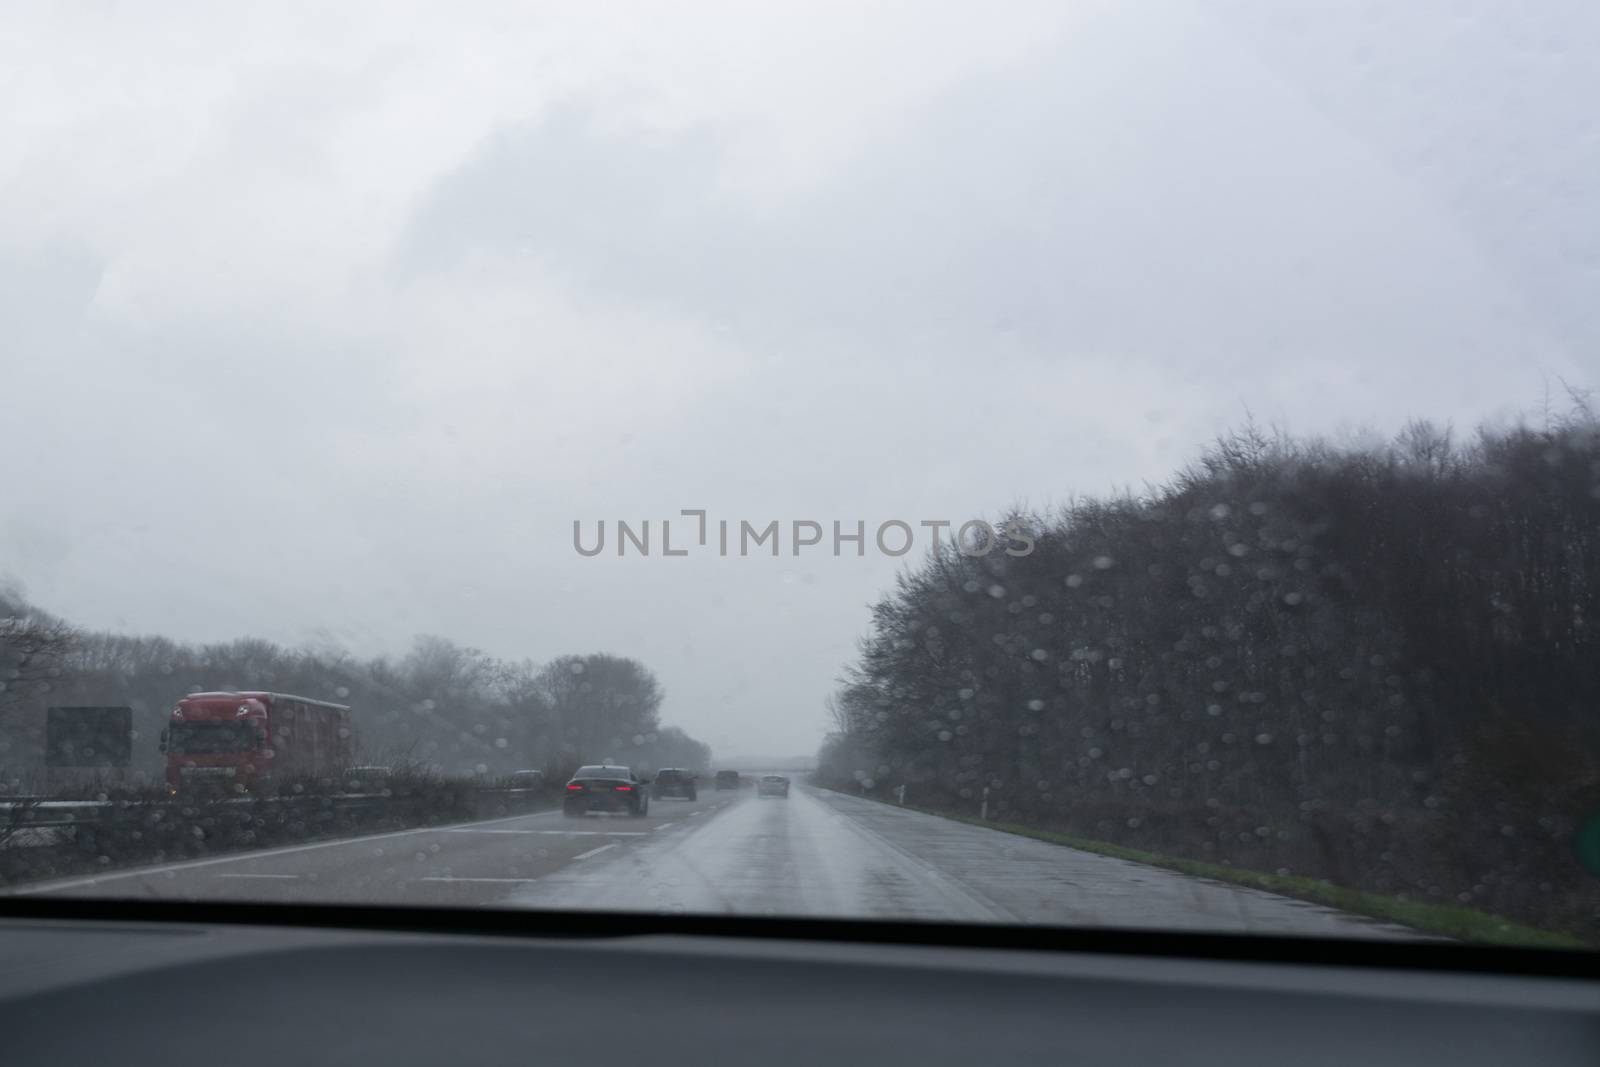 German Autobahn, bad weather conditions     by JFsPic